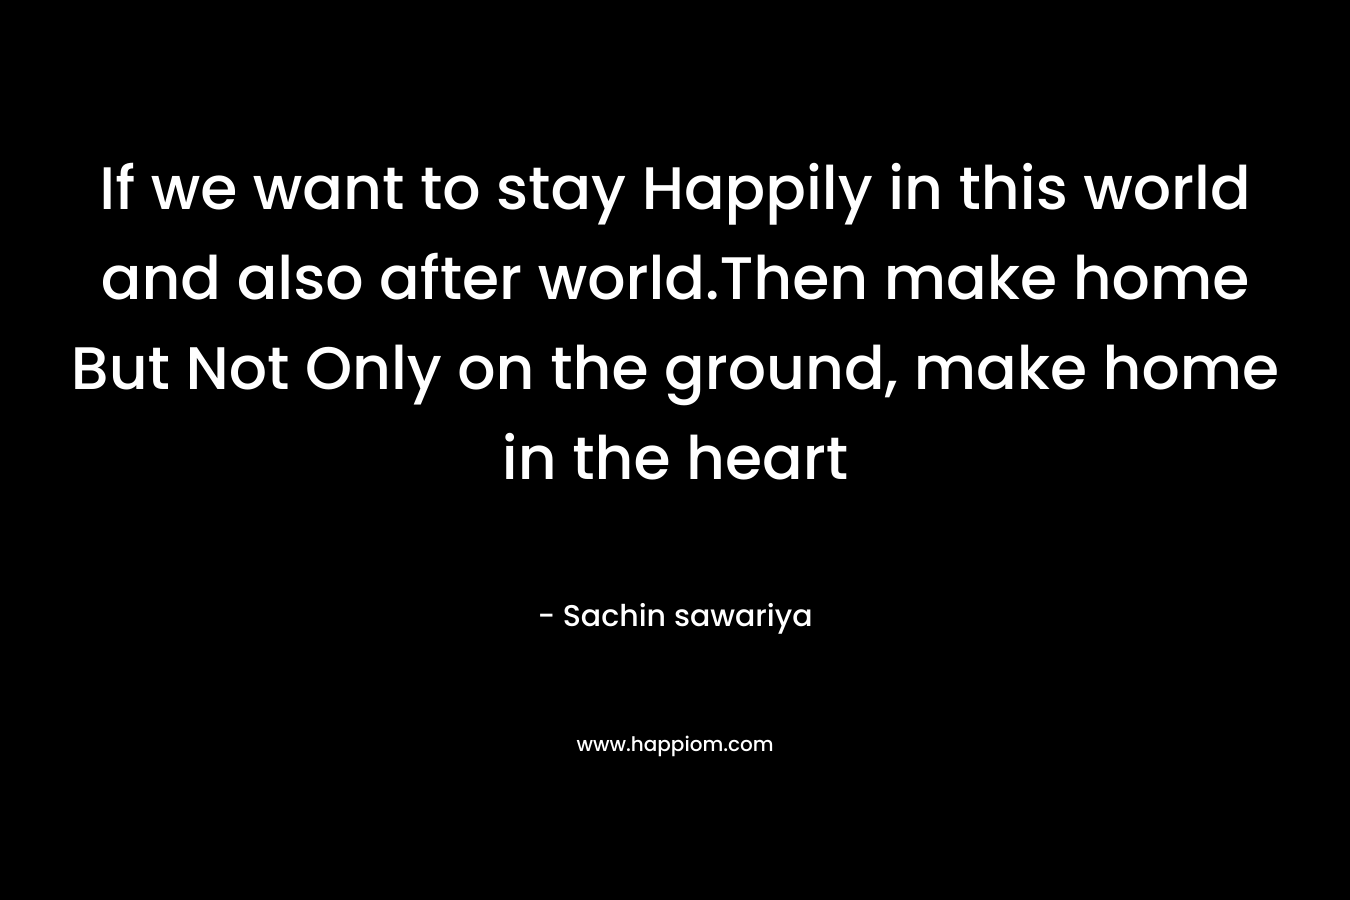 If we want to stay Happily in this world and also after world.Then make home But Not Only on the ground, make home in the heart – Sachin sawariya